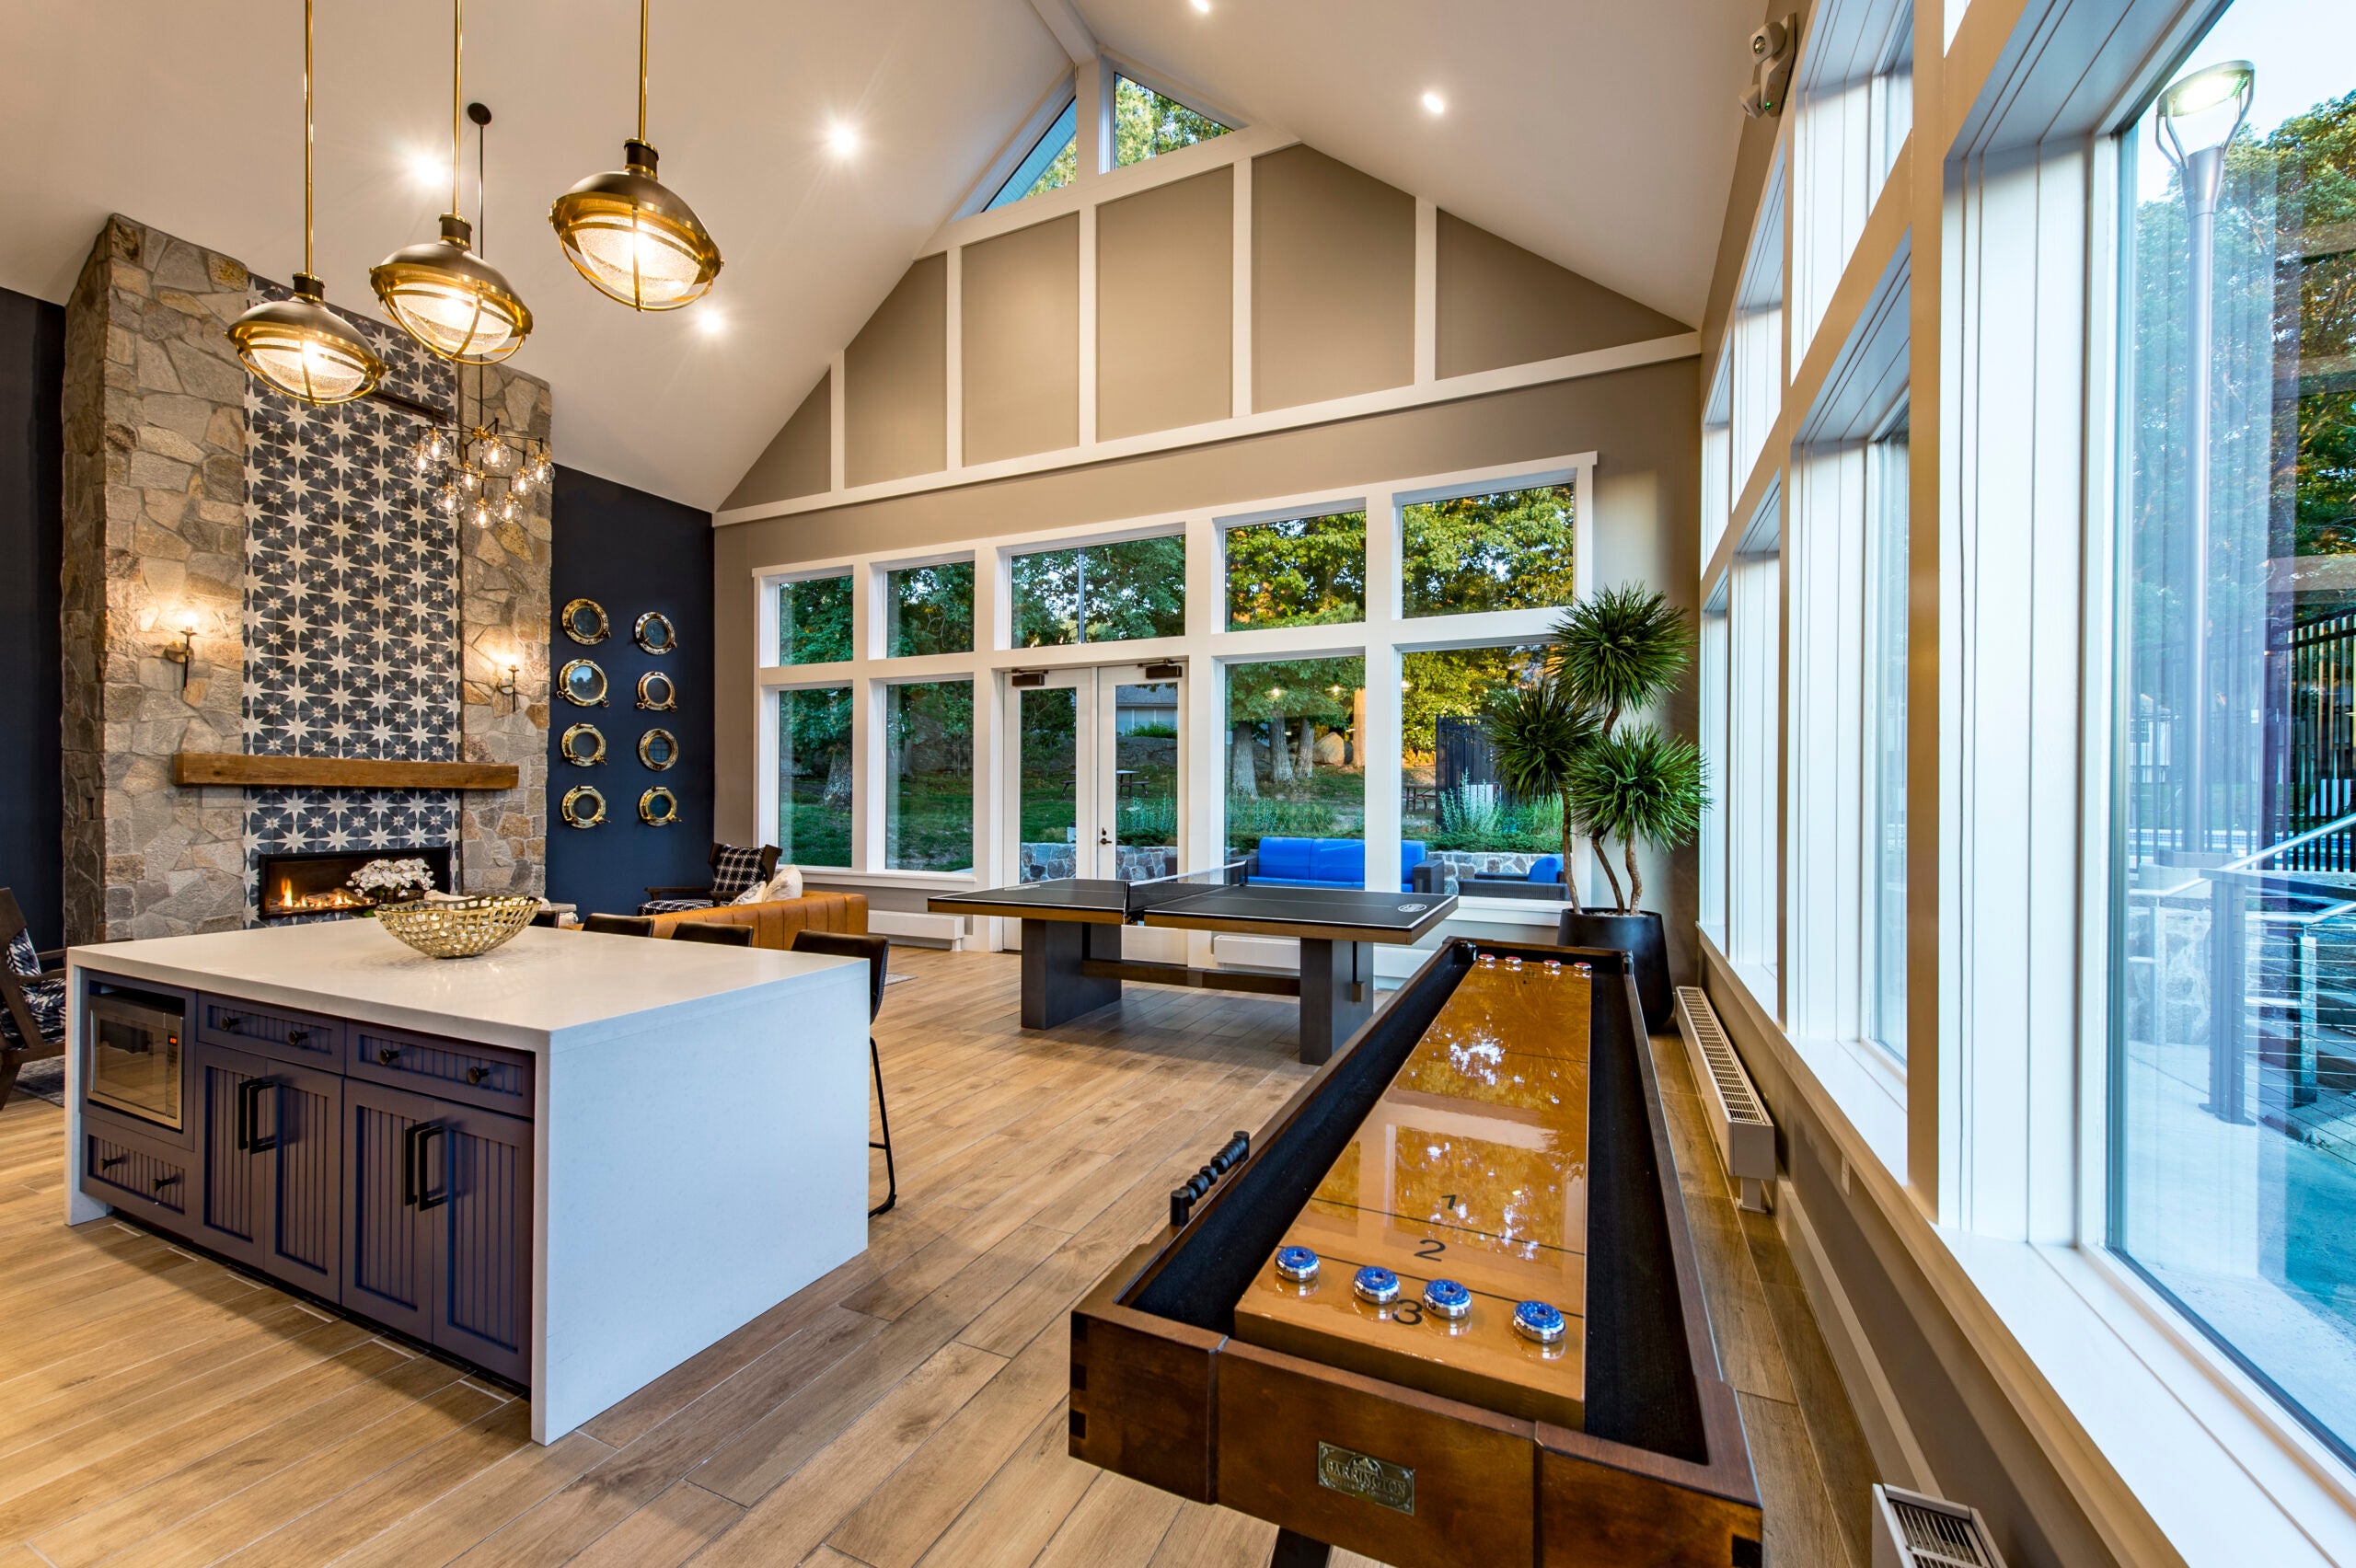 A two-story room with a vaulted ceiling, several industrial lights hanging from the ceiling, game tables, a fireplace, and a counter with a waterfall edge and seating. The color scheme is beige, white, and black. Expanses of windows line the walls. The flooring looks like wood.